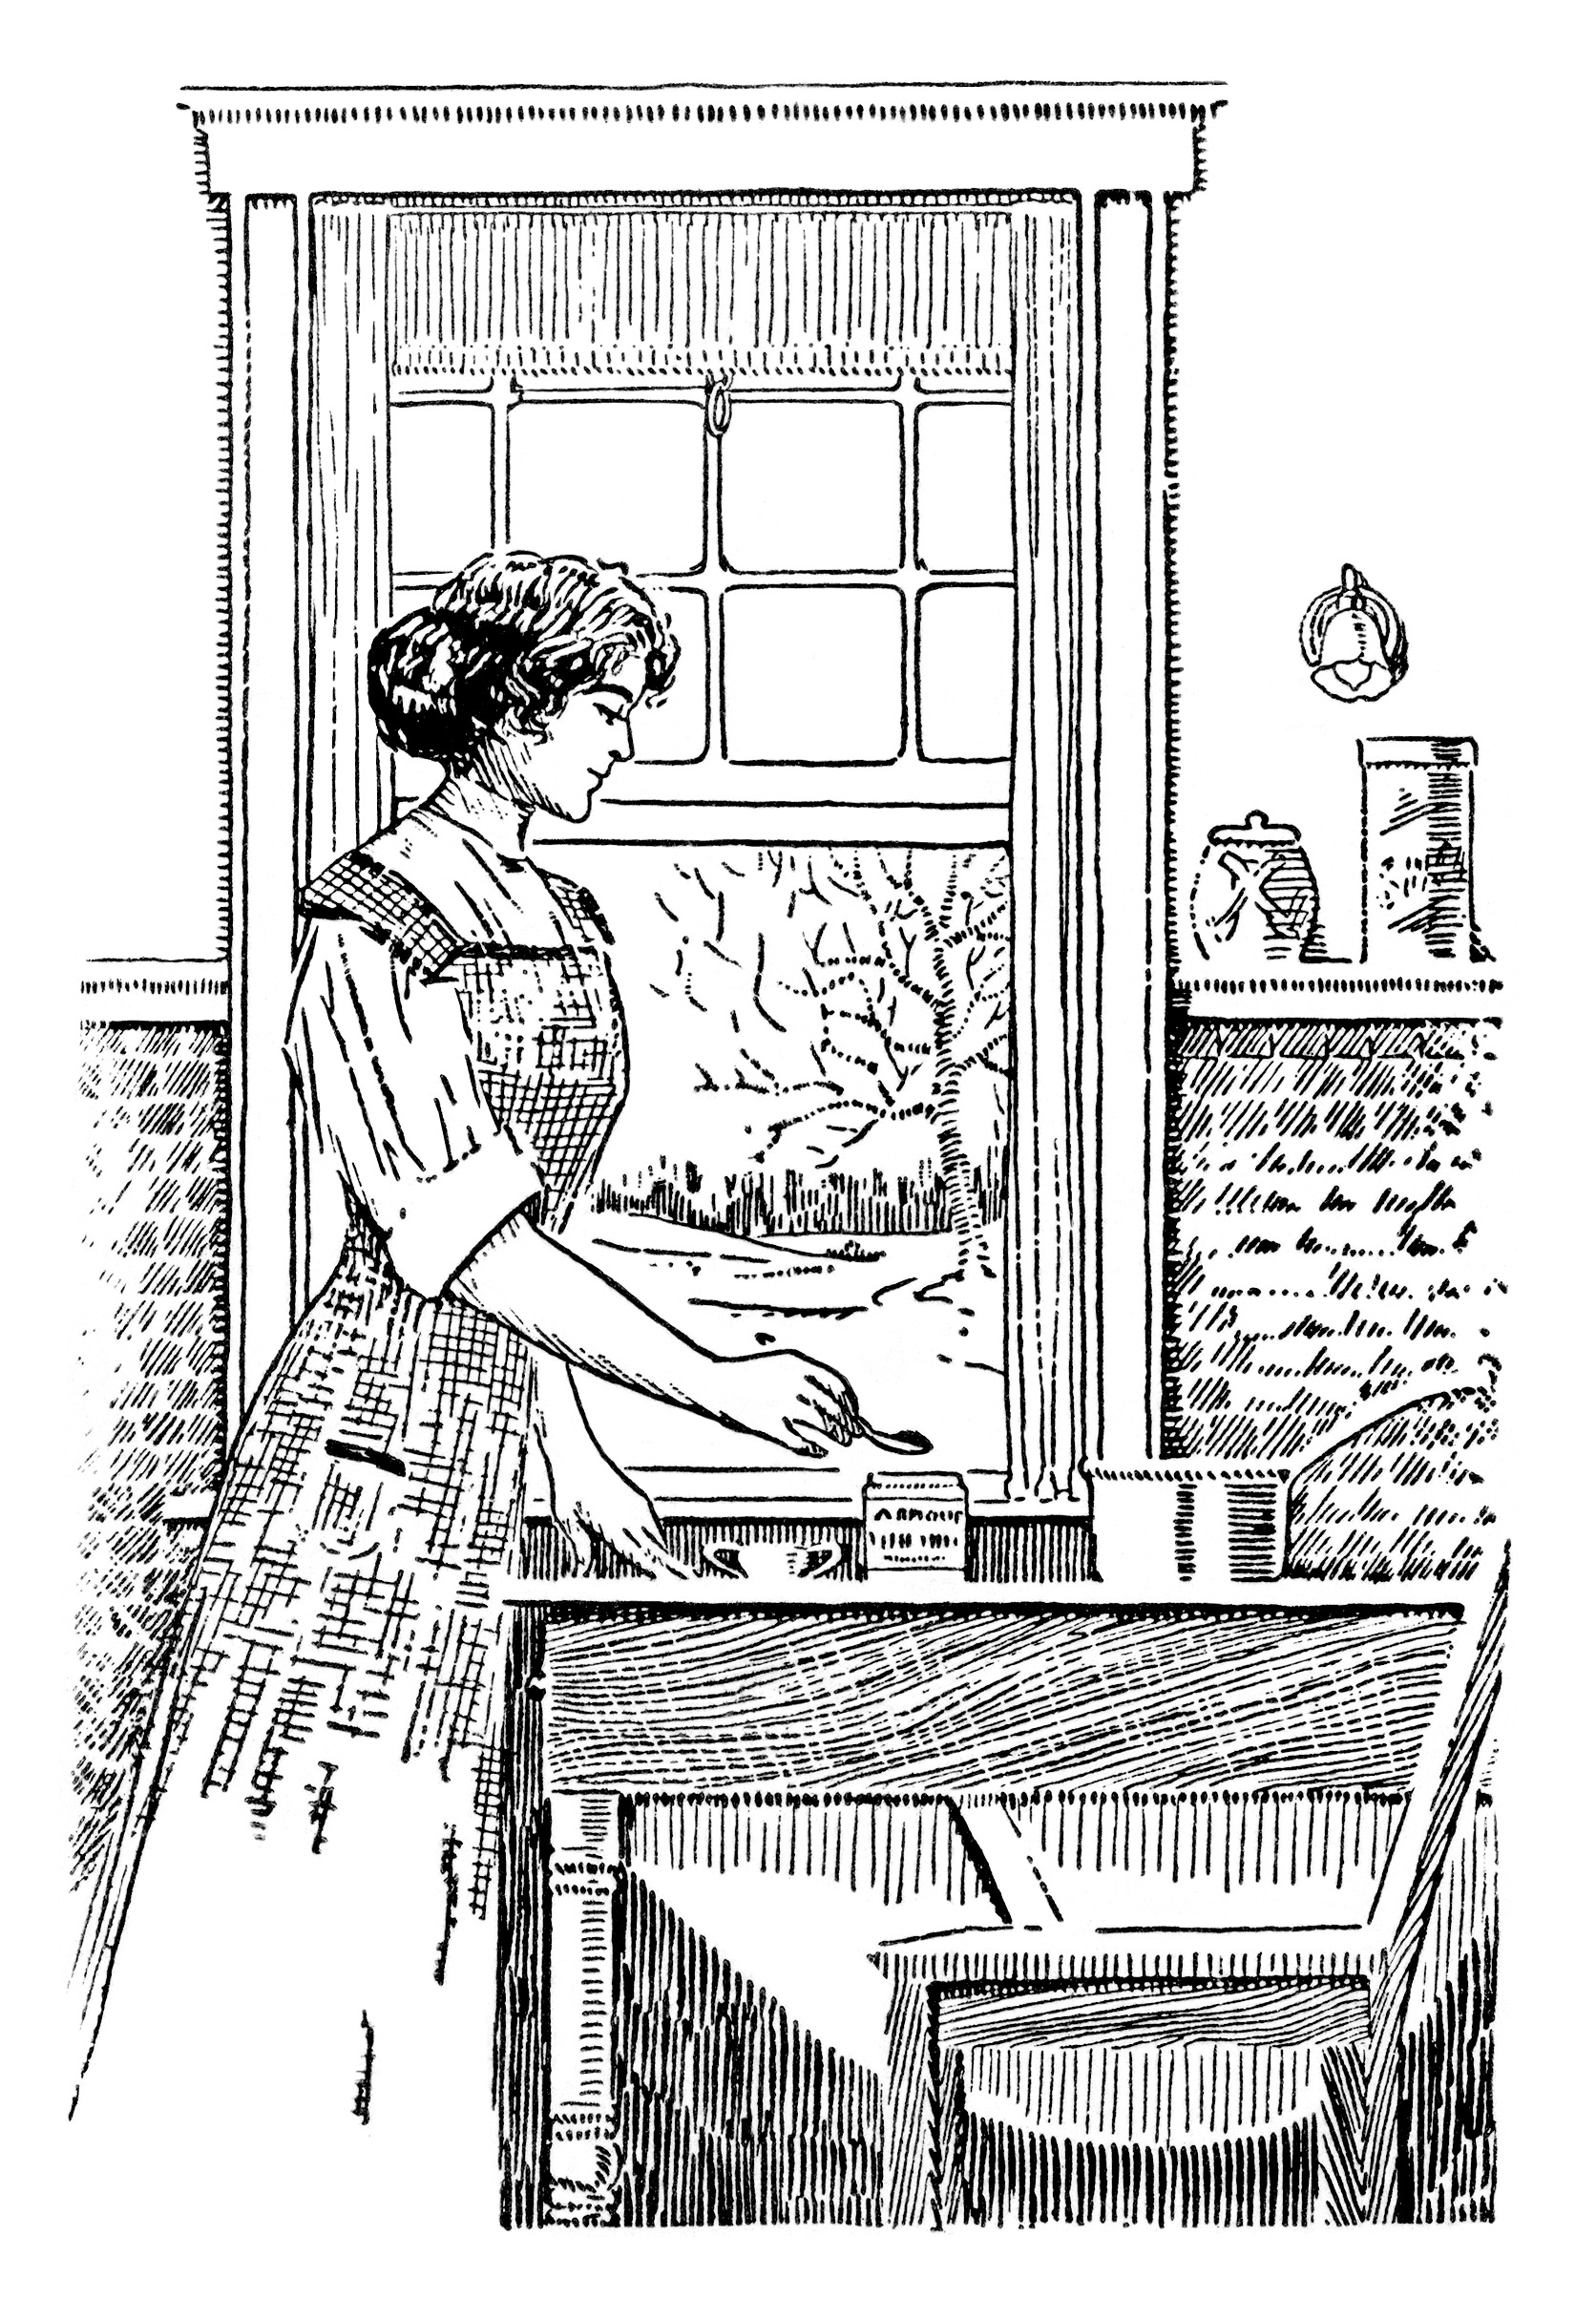 vintage kitchen clipart, black and white clipart, woman cooking image, preparing a meal illustration. digital food graphics